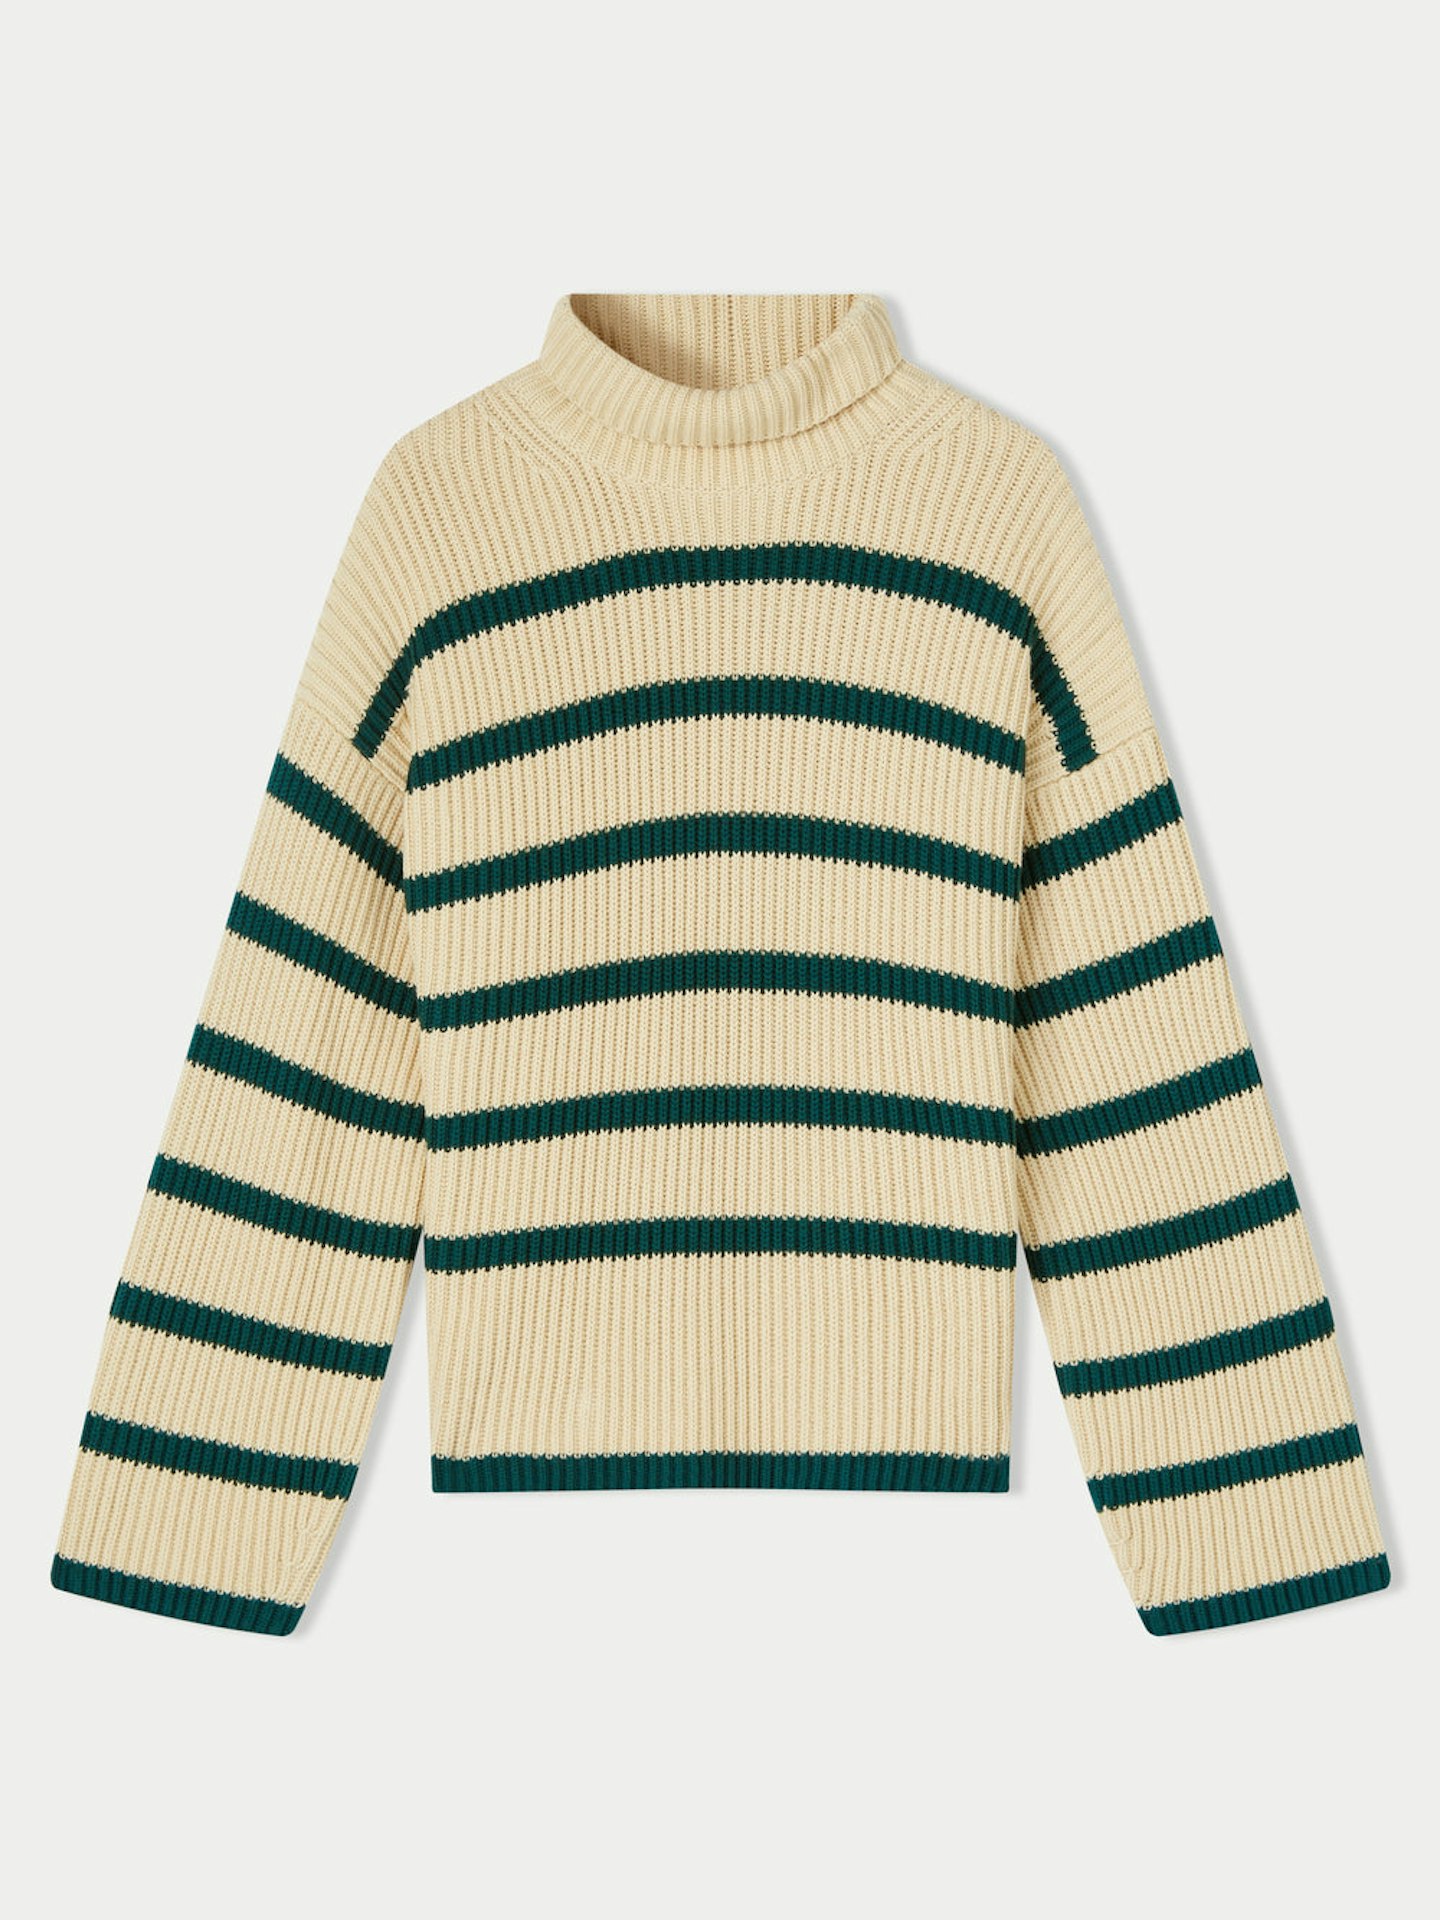 Jigasw jumper what to buy this weekend